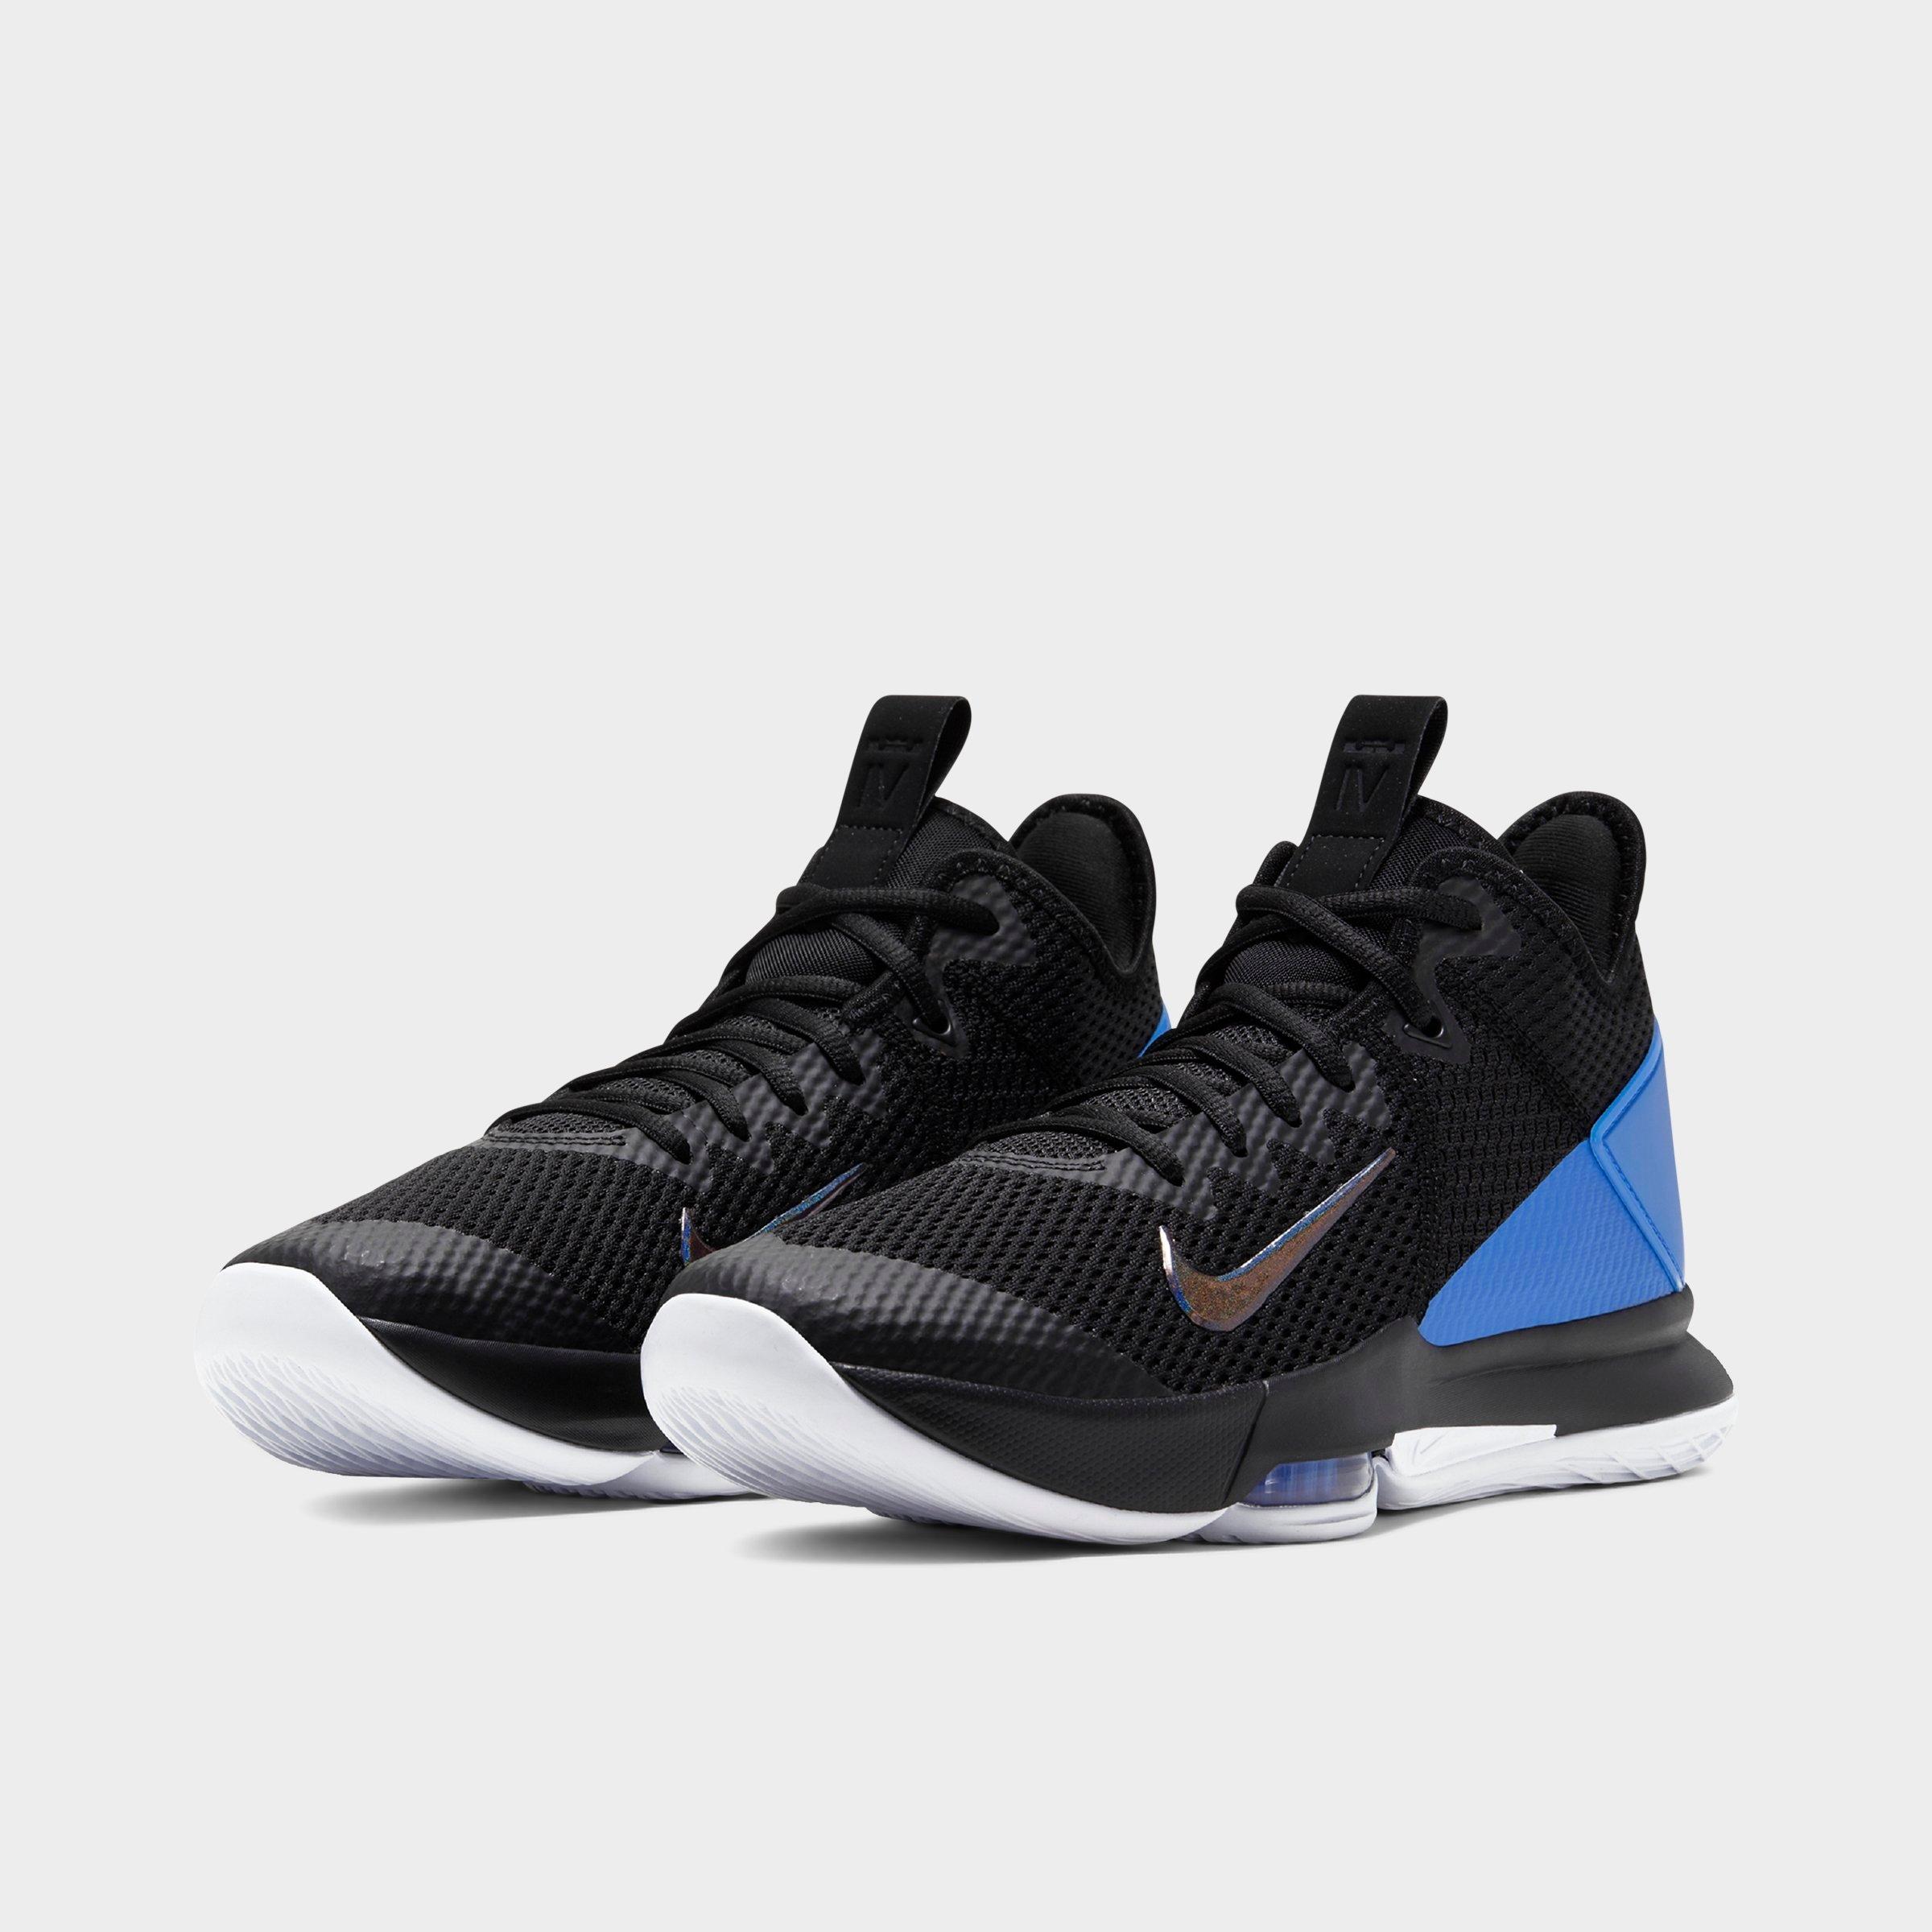 lebron witness 4 colors